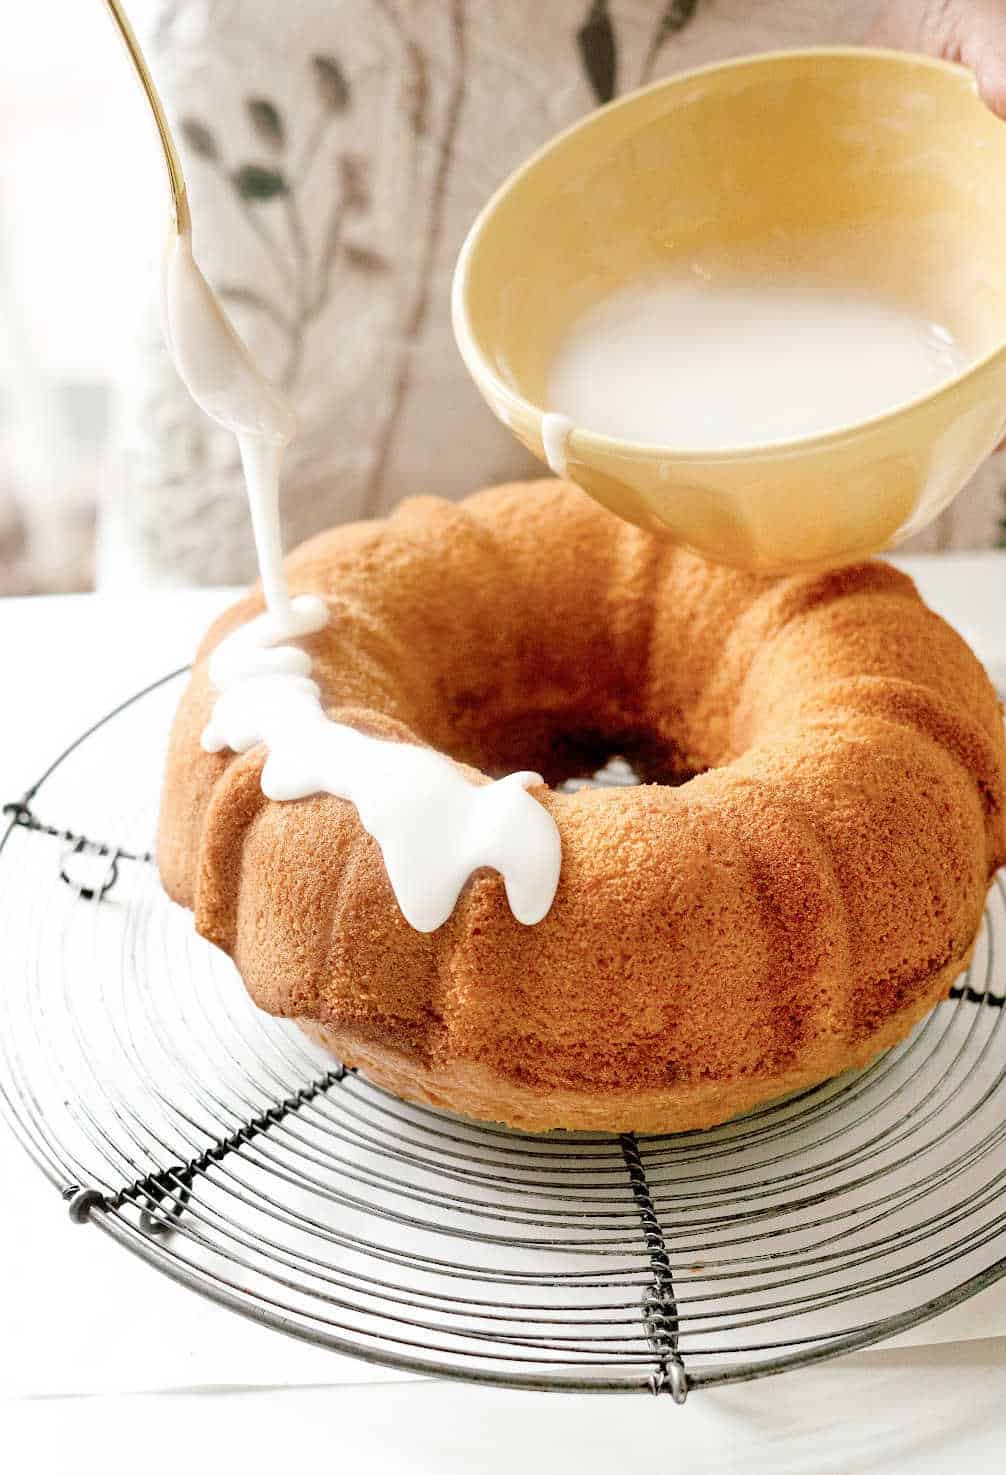 Glazing a bundt cake on a wire rack on a white surface. Yellow bowl with glaze.